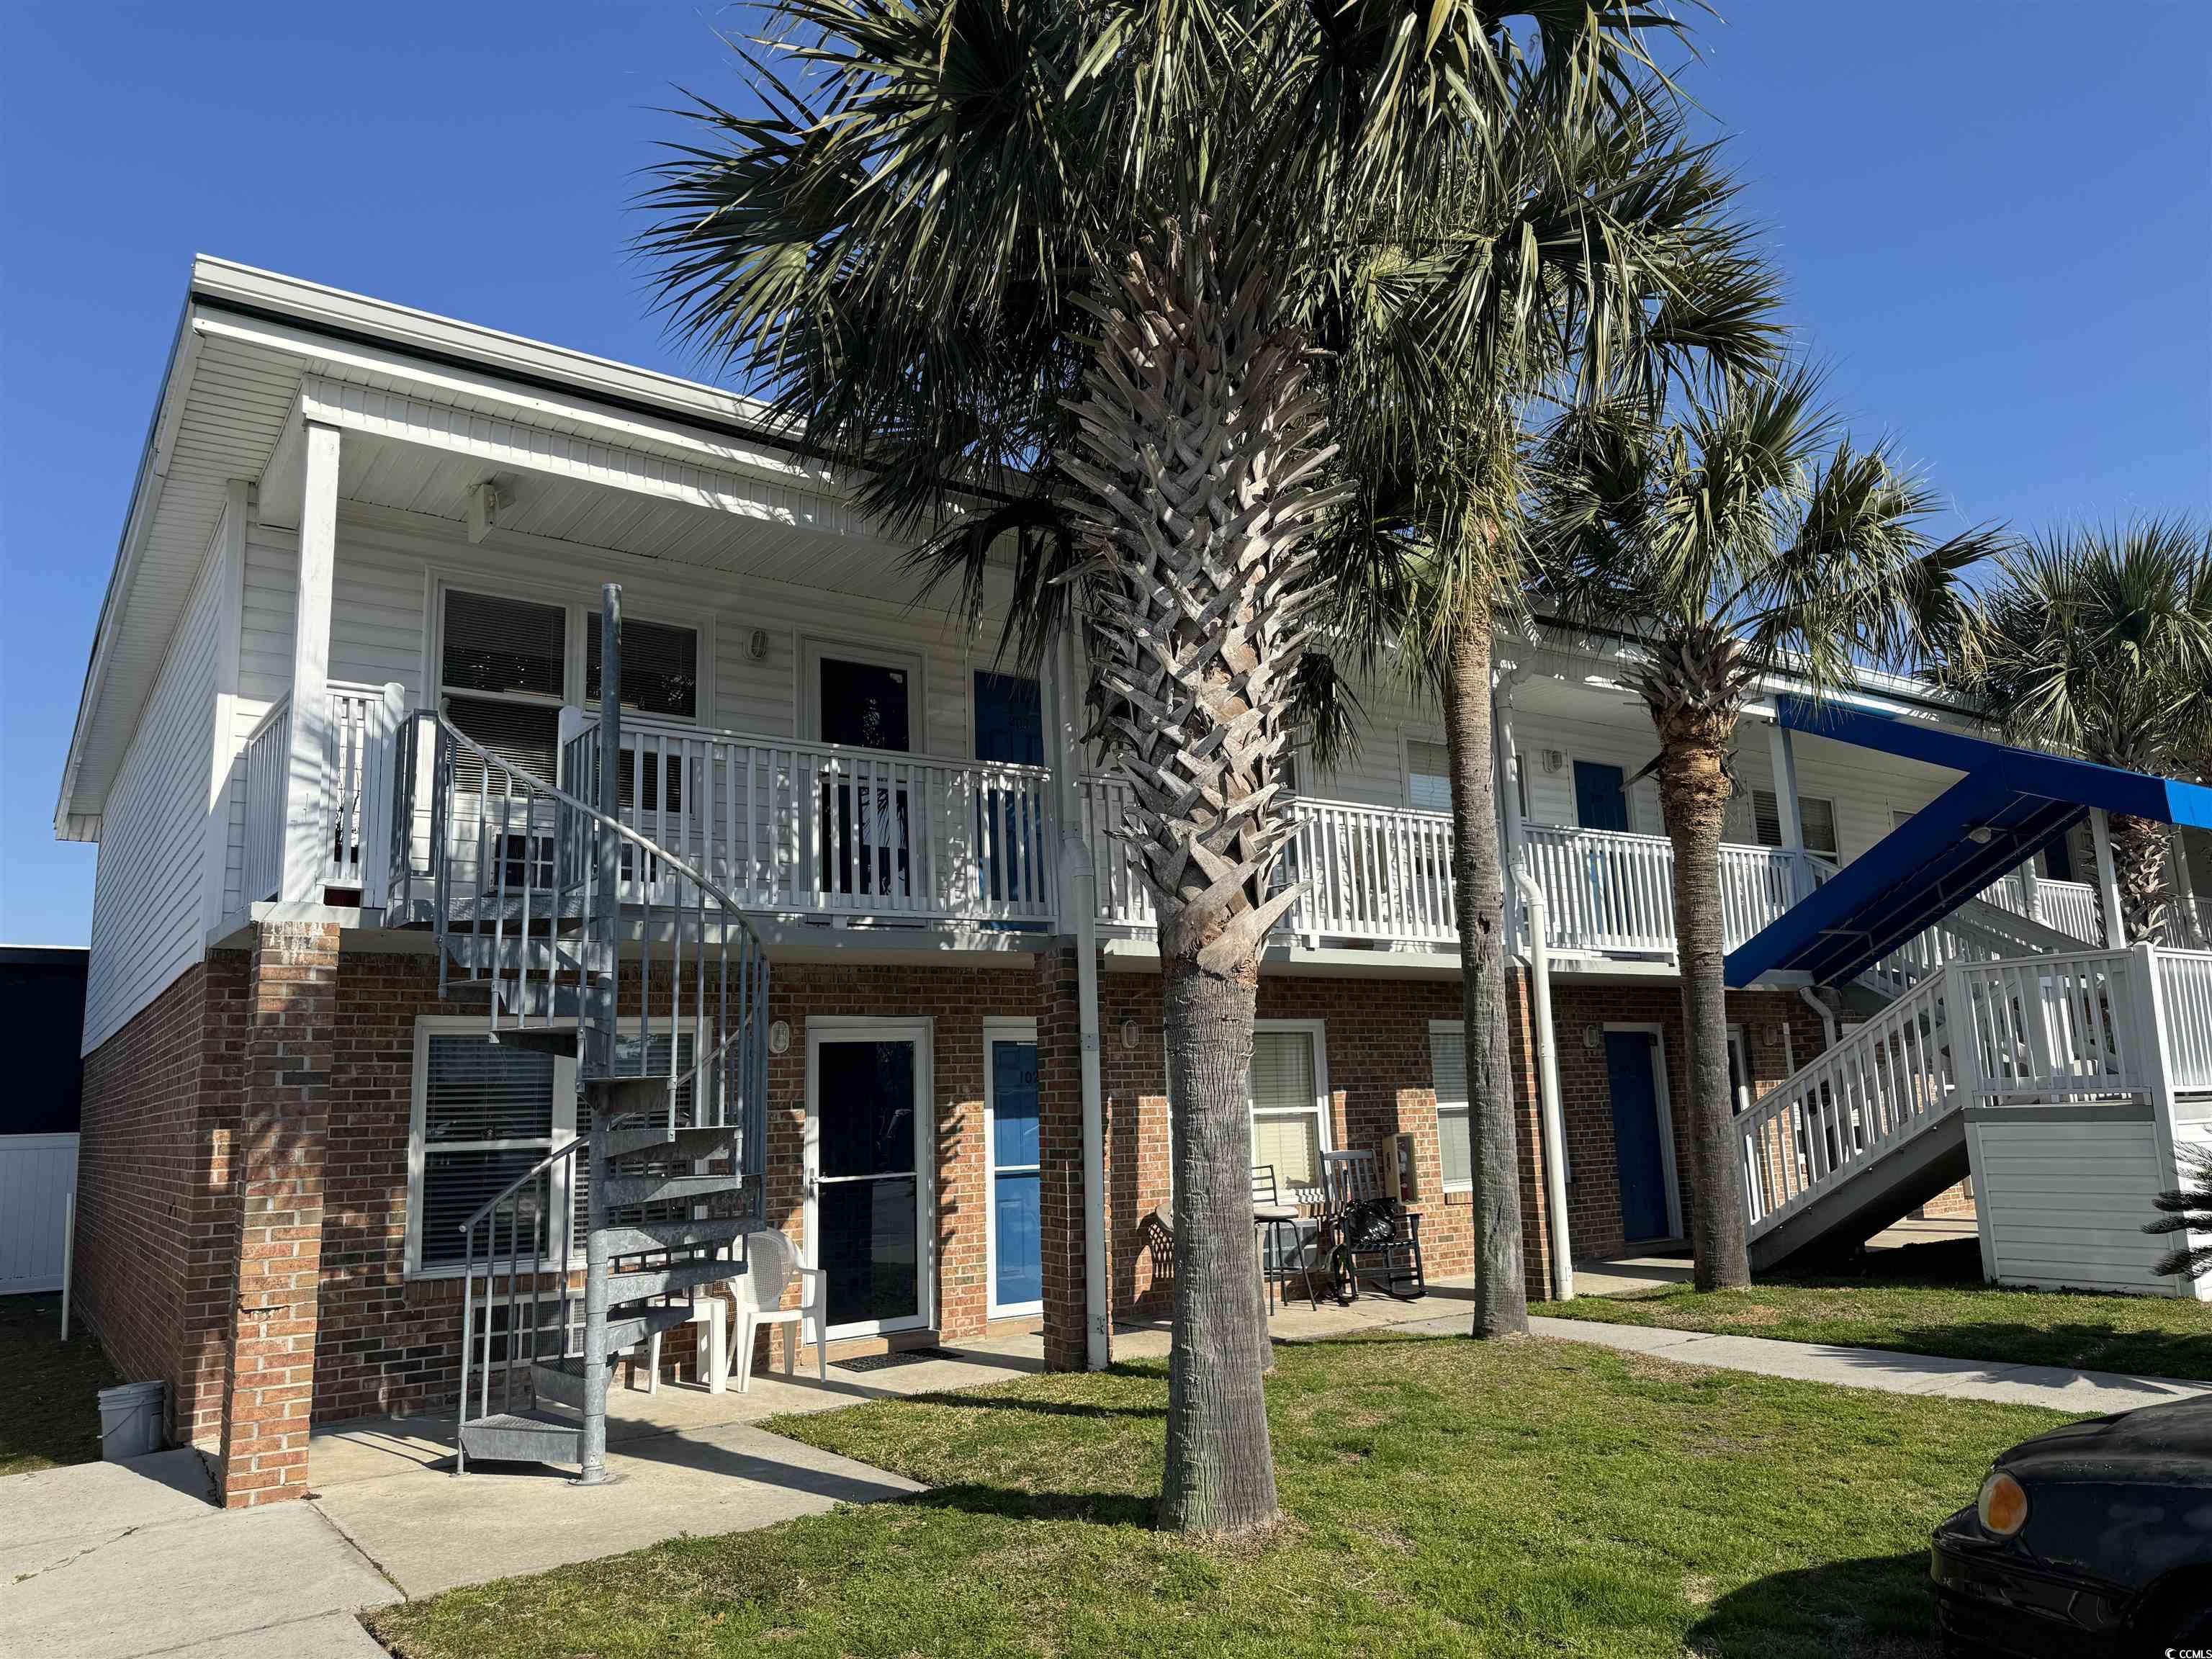 affordable end unit condo just east of 17 in the crescent beach section of north myrtle beach. condo is a rental unit. one large bedroom large enough for a king size bed, one bath, tile and lvp type flooring, kitchen with full-size appliances, tub/shower combo, on-site laundry, great central north myrtle beach location, well-kept grounds, community pool and great nmb central location.